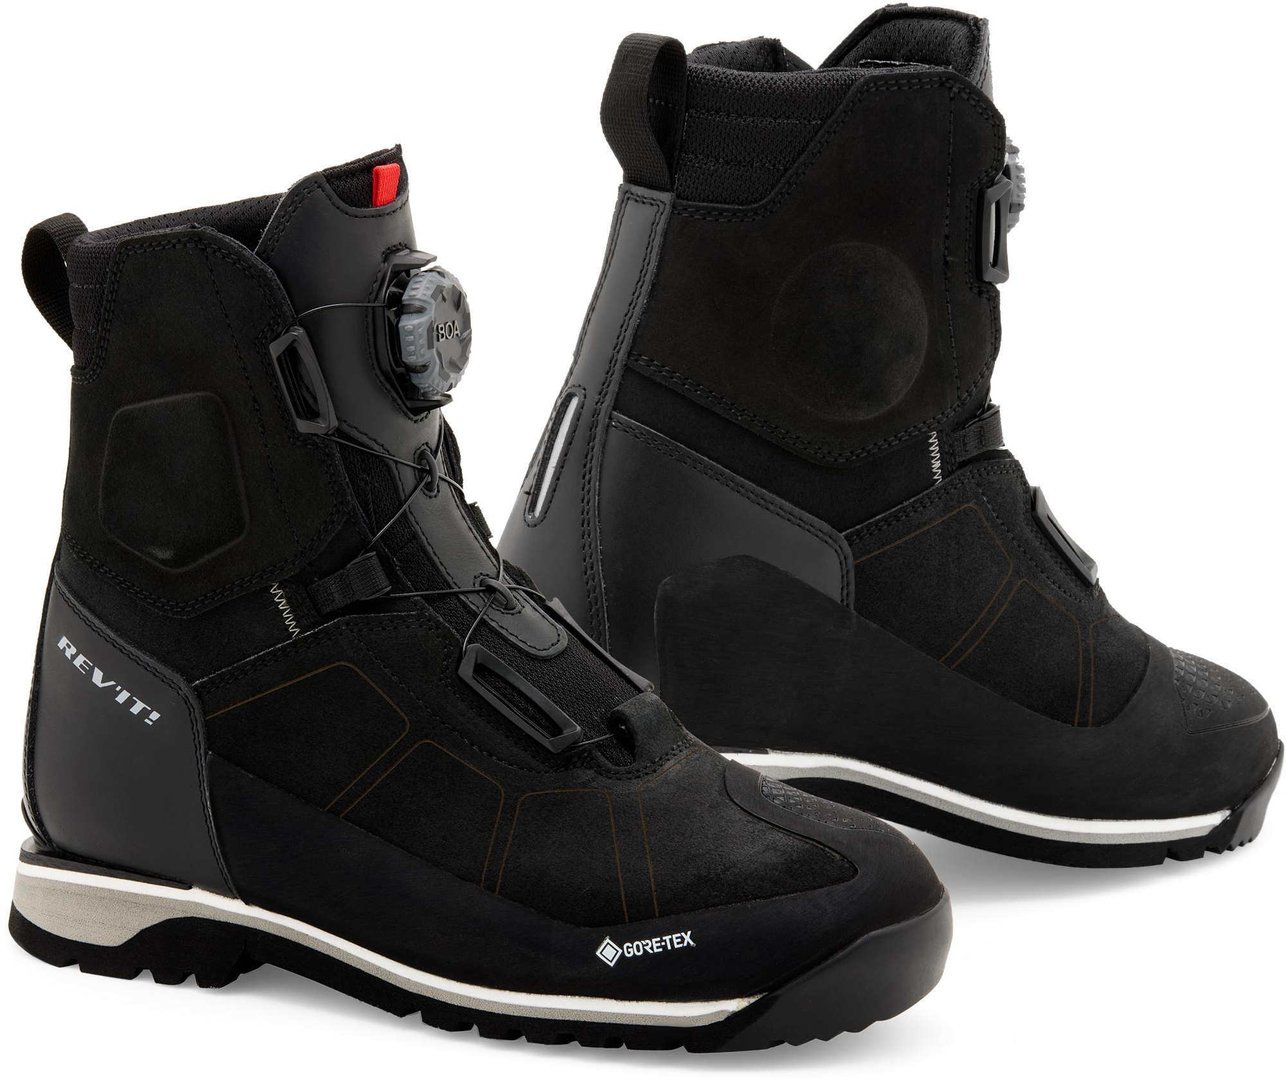 Image of REV'IT! Pioneer GTX Boots Black Size 40 ID 8700001327589